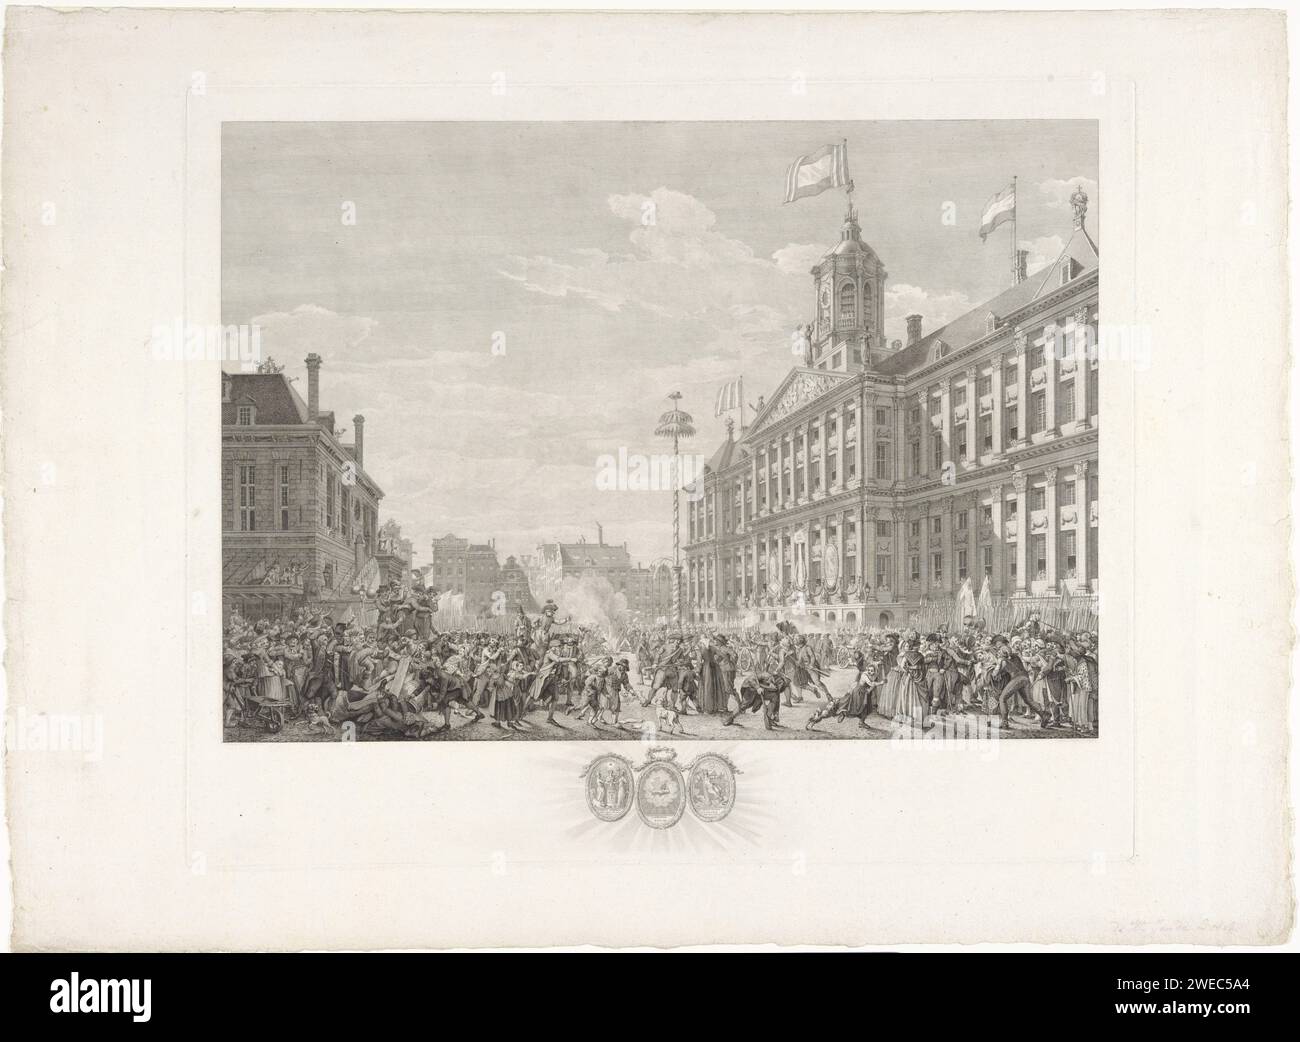 Alliantiegeest Op Dam, 1795, Reinier Vinkeles (I), After Jacques Kuyper, 1796 print The Alliance party on Dam Square in front of the Town Hall in Amsterdam, to celebrate the Alliance closed between the French and the Batavian Republic, 19 June 1795. Chaotic Festive, Central De Vrijheidsboom. In the caption the three oval medallions with allegorical representations that hung on the facade of the town hall. Amsterdam paper etching dancing around the tree of liberty. alliance, league, union, foedus Dam. City Hall of Amsterdam (1655-1808). Waag on Dam Square Stock Photo